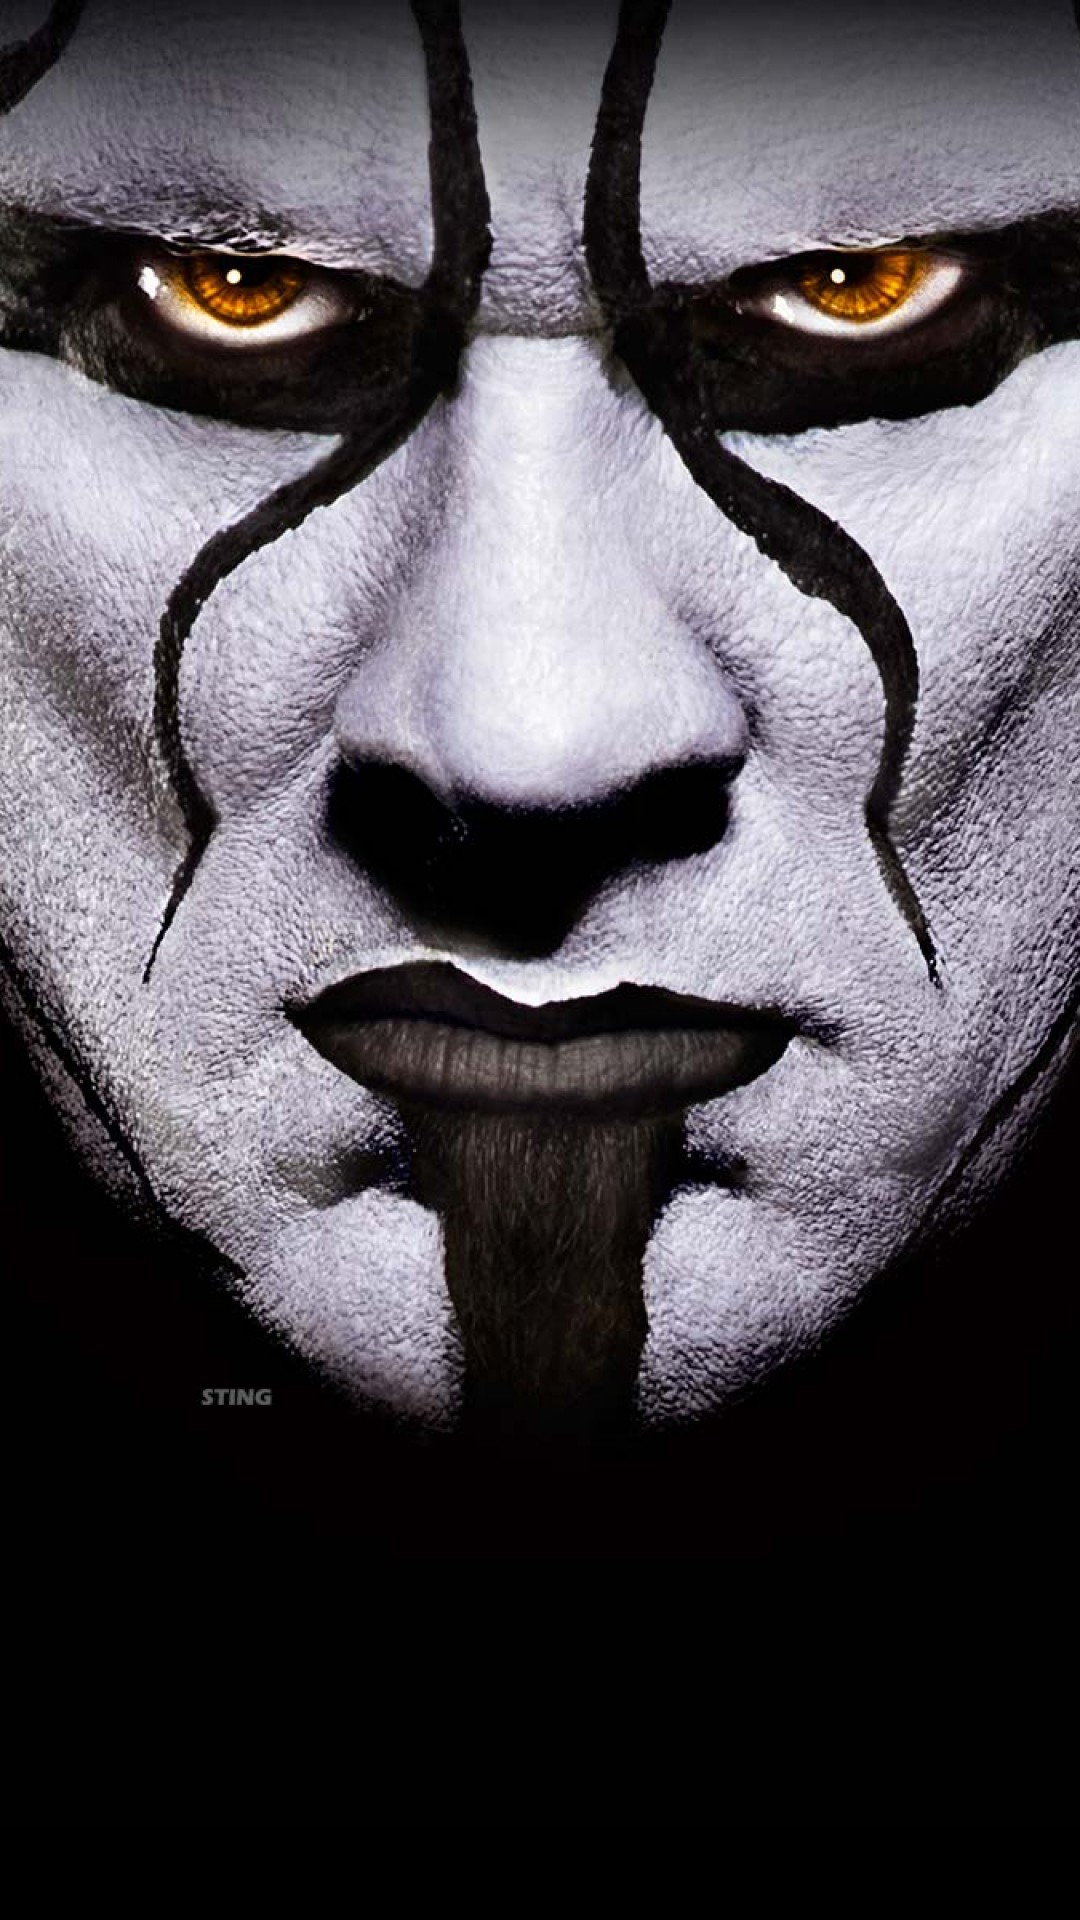 1080x1920 Wrestler Sting Painting HD Wallpaper | The Icon STING!!!!!!! | Pinterest